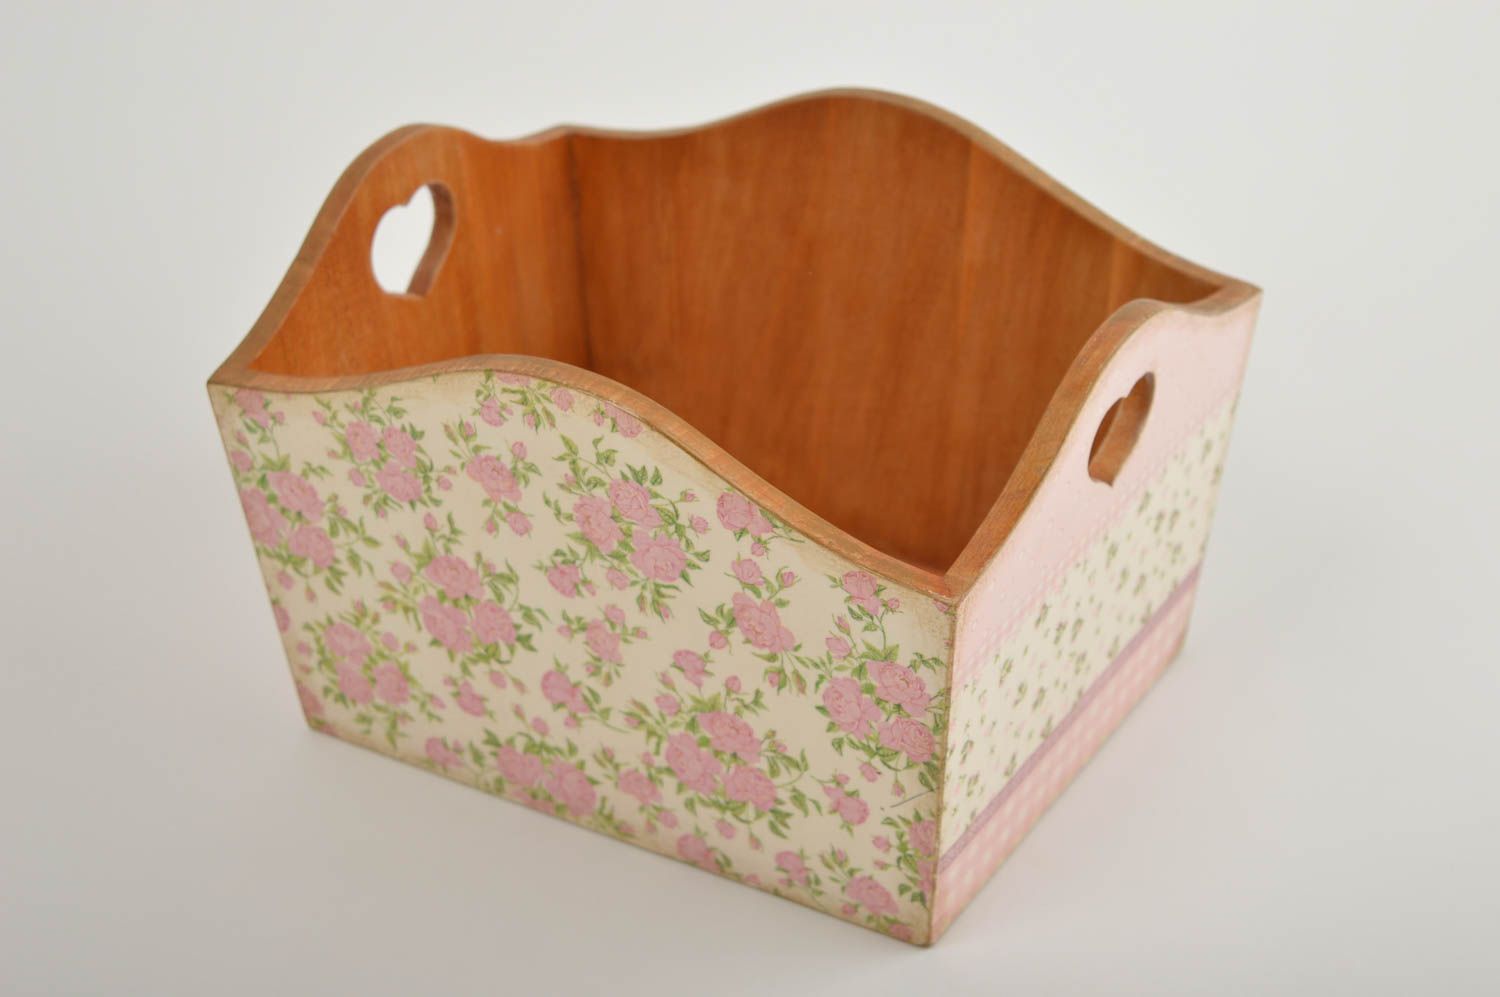 Handmade decorative box for home box for little things home decor ideas photo 2